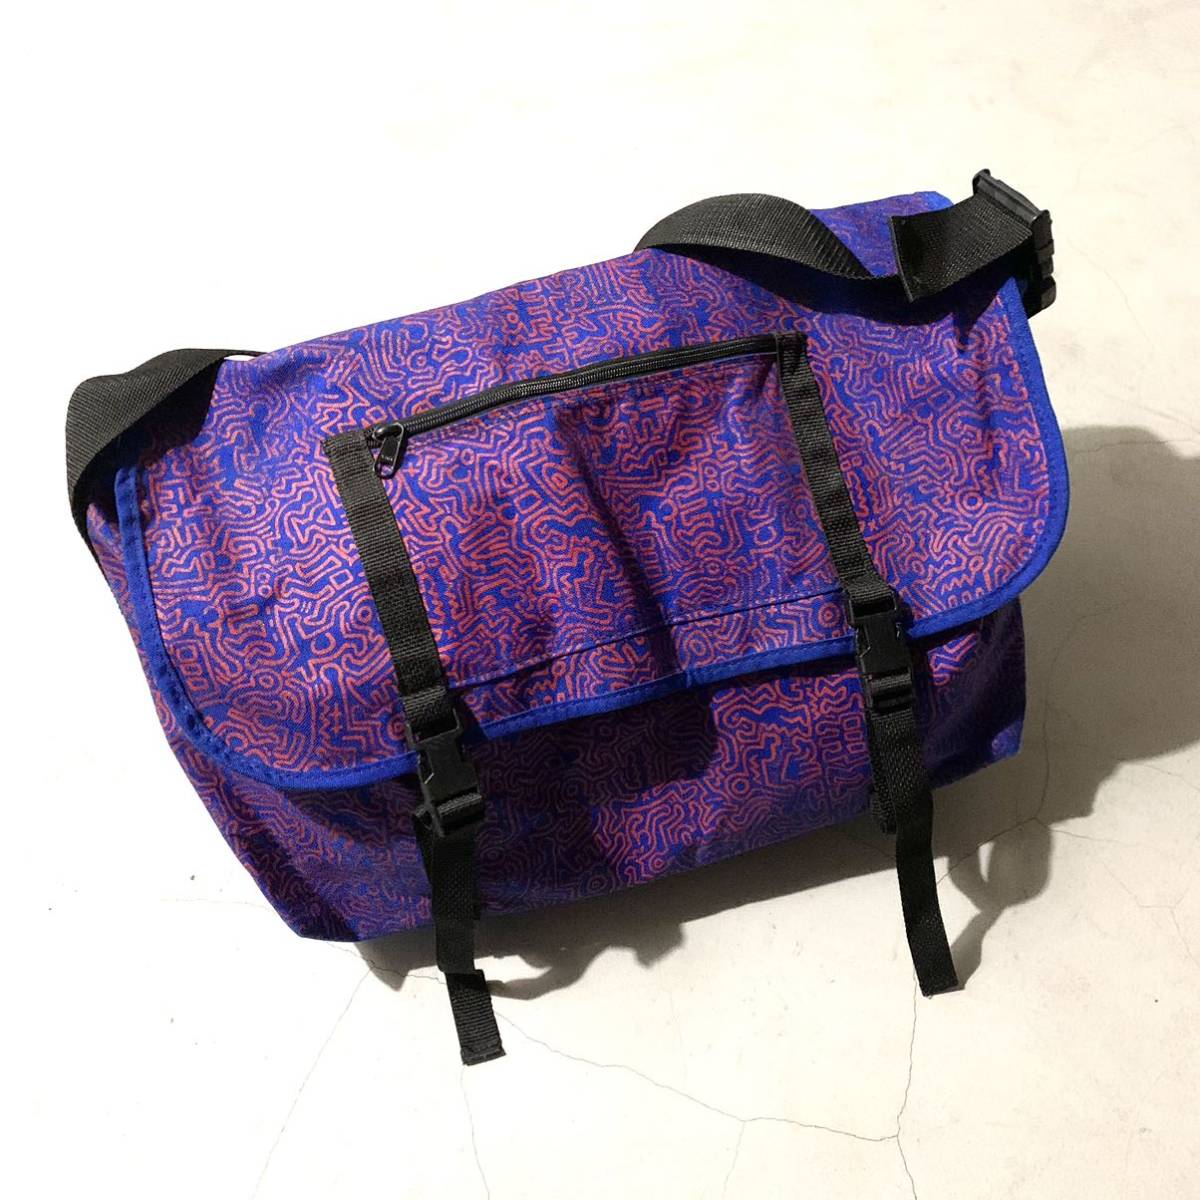 90s POP SHOP Keith Haring Keith he ring extra-large messenger bag blue × red Vintage inspection popshop USA made America made 